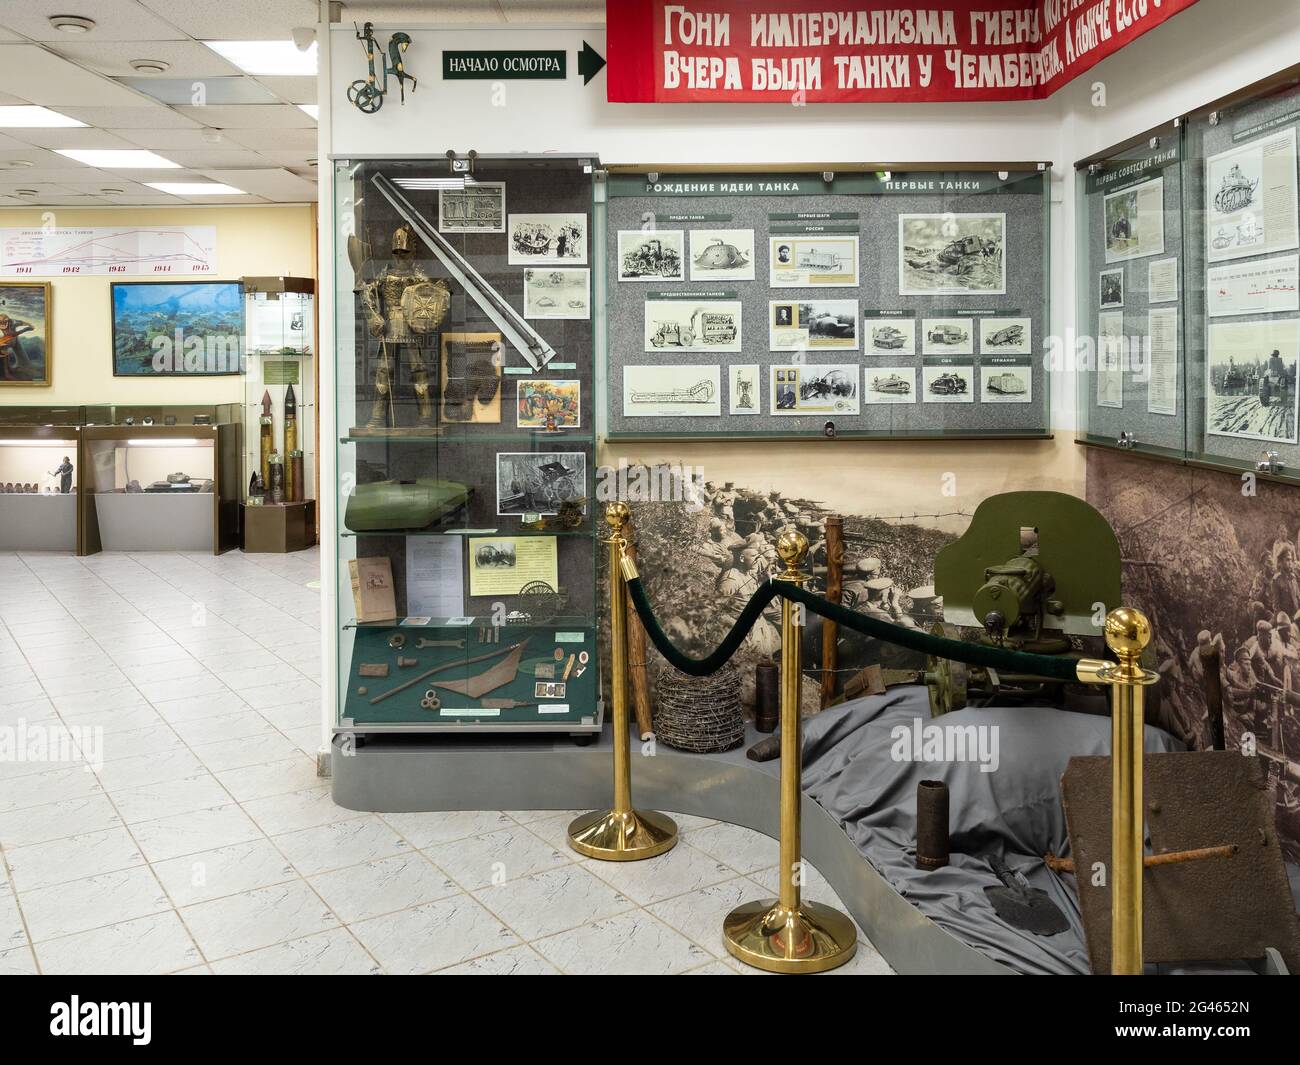 Sholohovo, Moscow Region, Russia - June 8, 2021: exhibition in Museum of History of the T-34 Tank. The founder of the museum is Vasilieva, daughter of Stock Photo